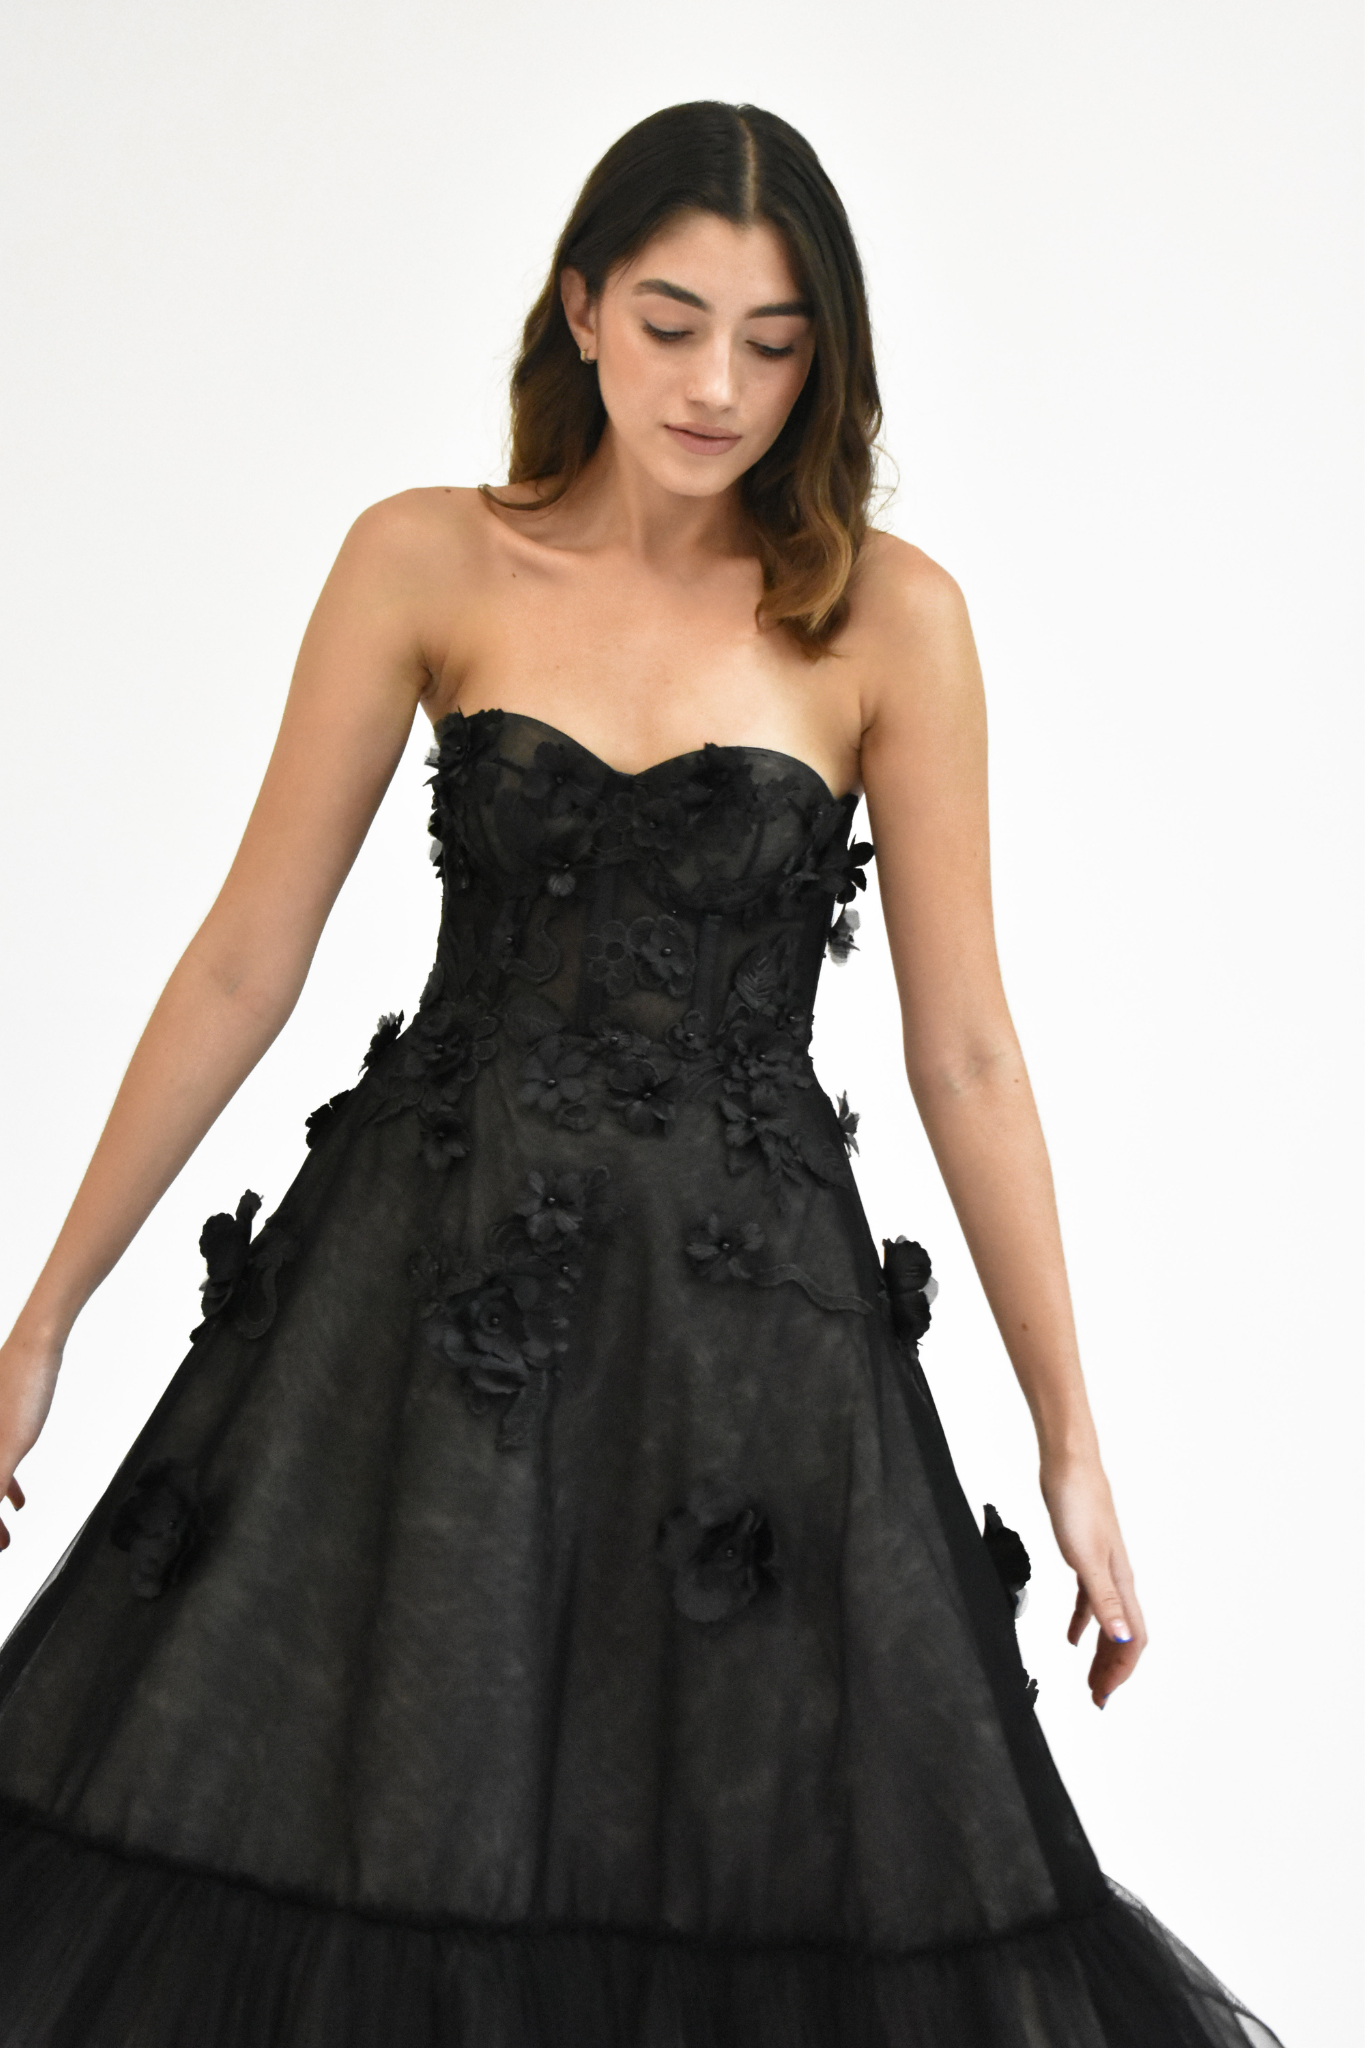 BLACK CORSET MIDI TULLE DRESS WITH FLORAL EMBROIDERY DETAILS